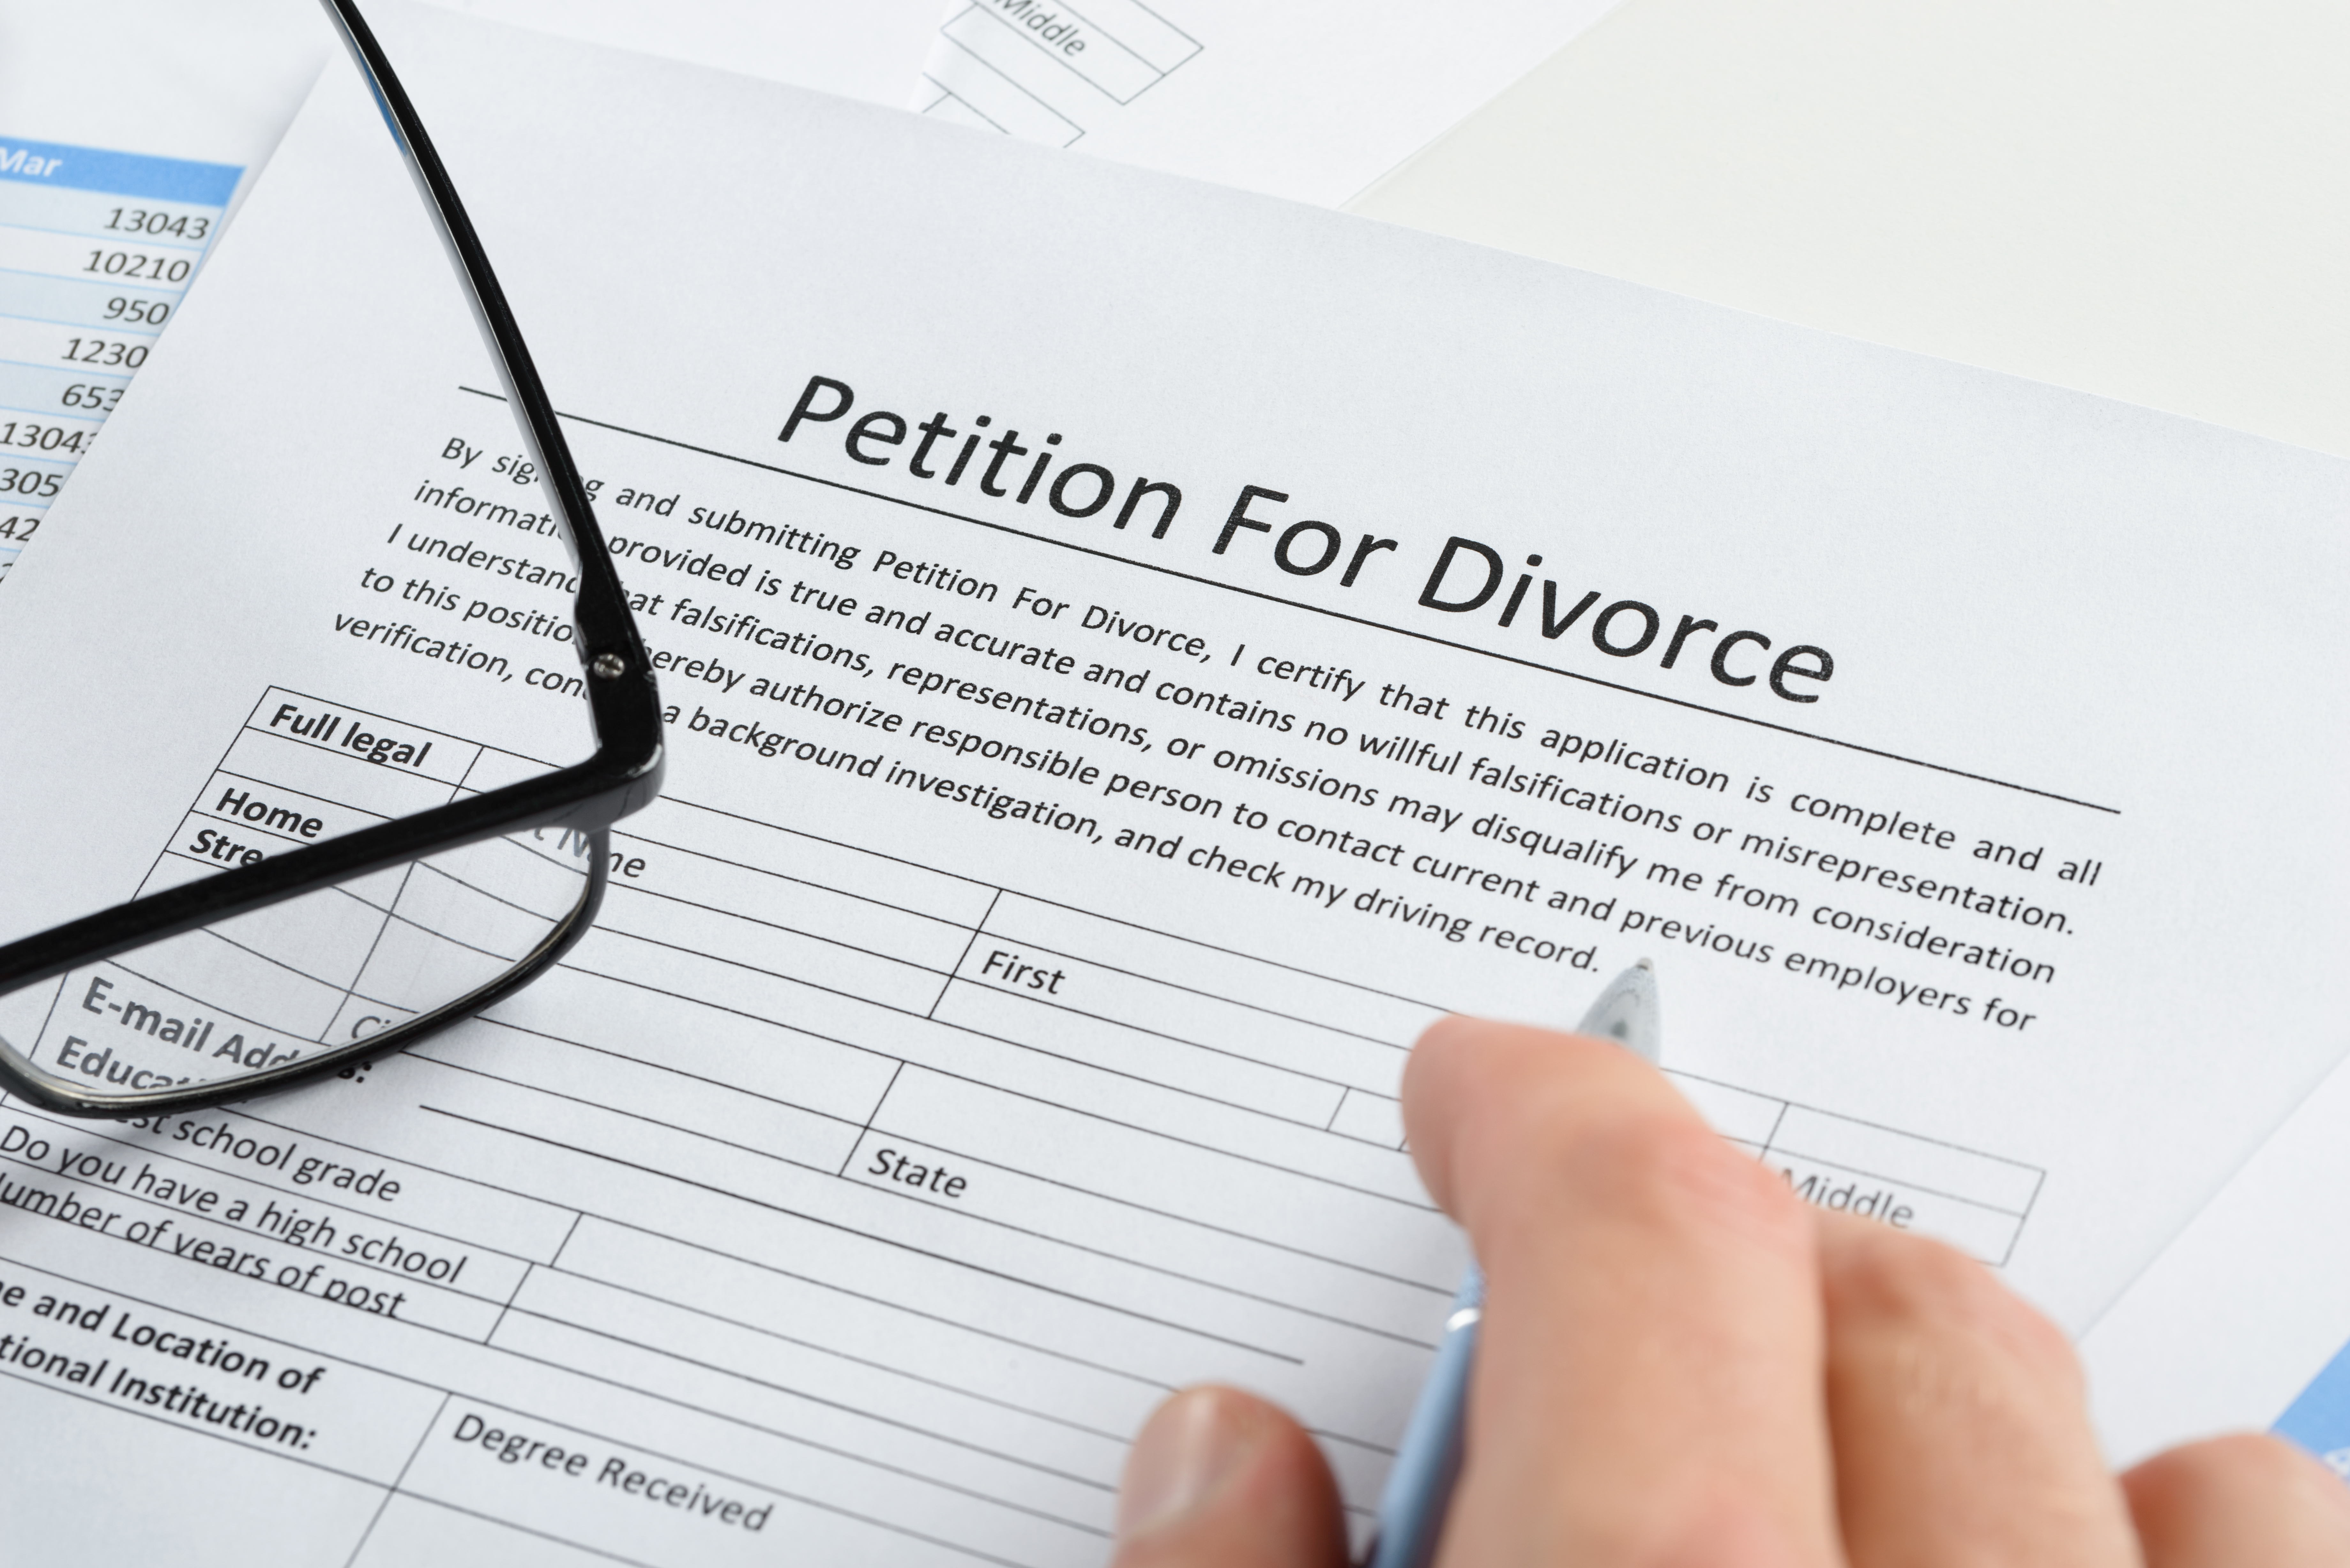 Petition for divorced served by our UK Process Servers